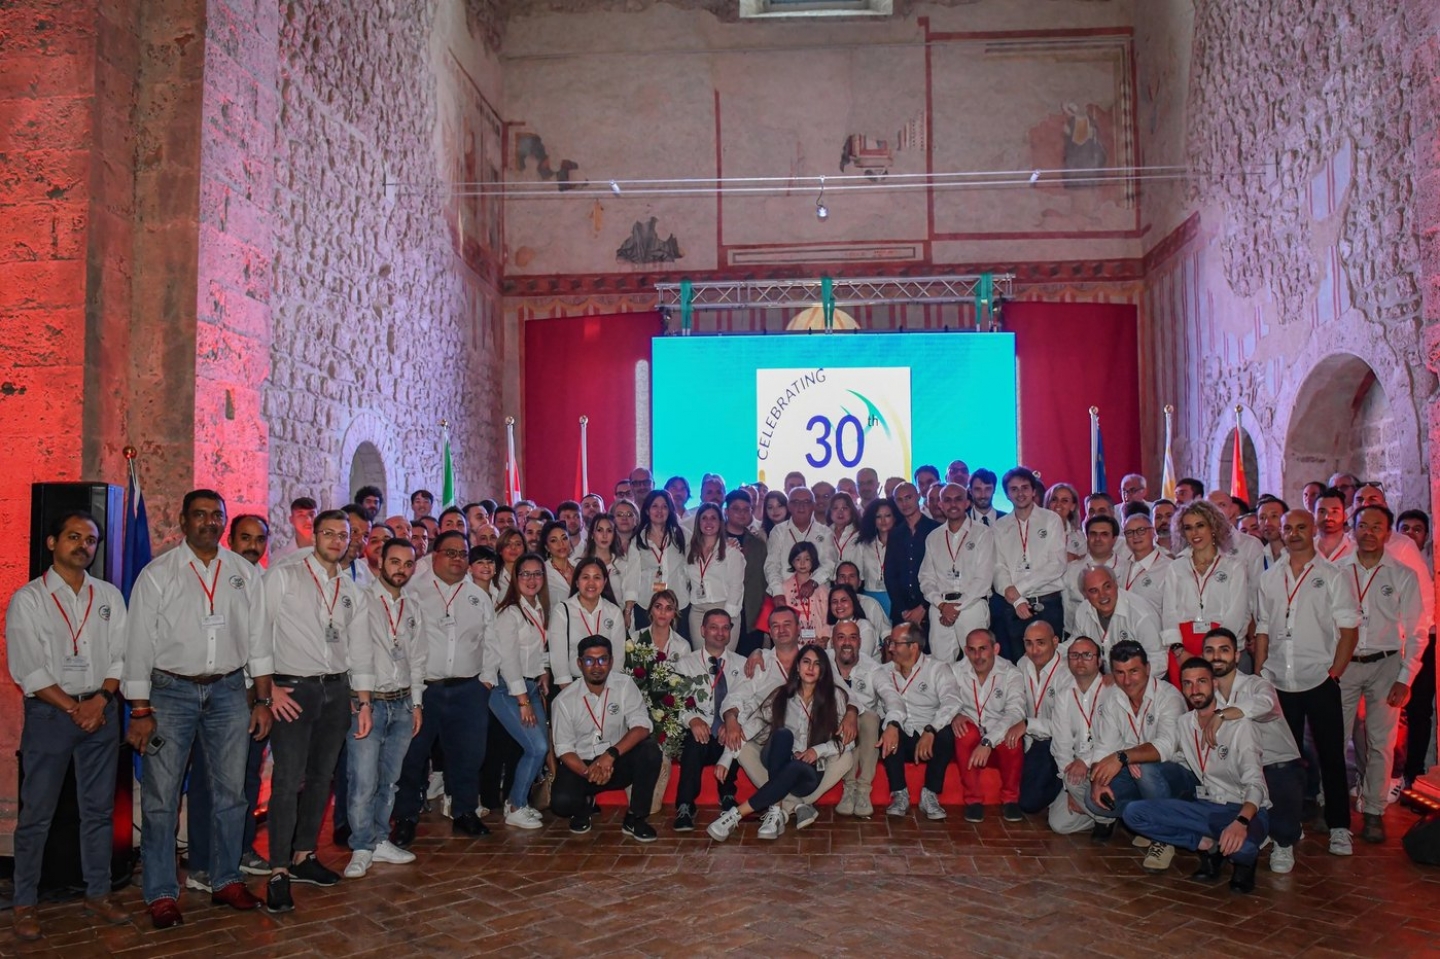 EDA Industries celebrated 30 years at the Abbey of San Pastore